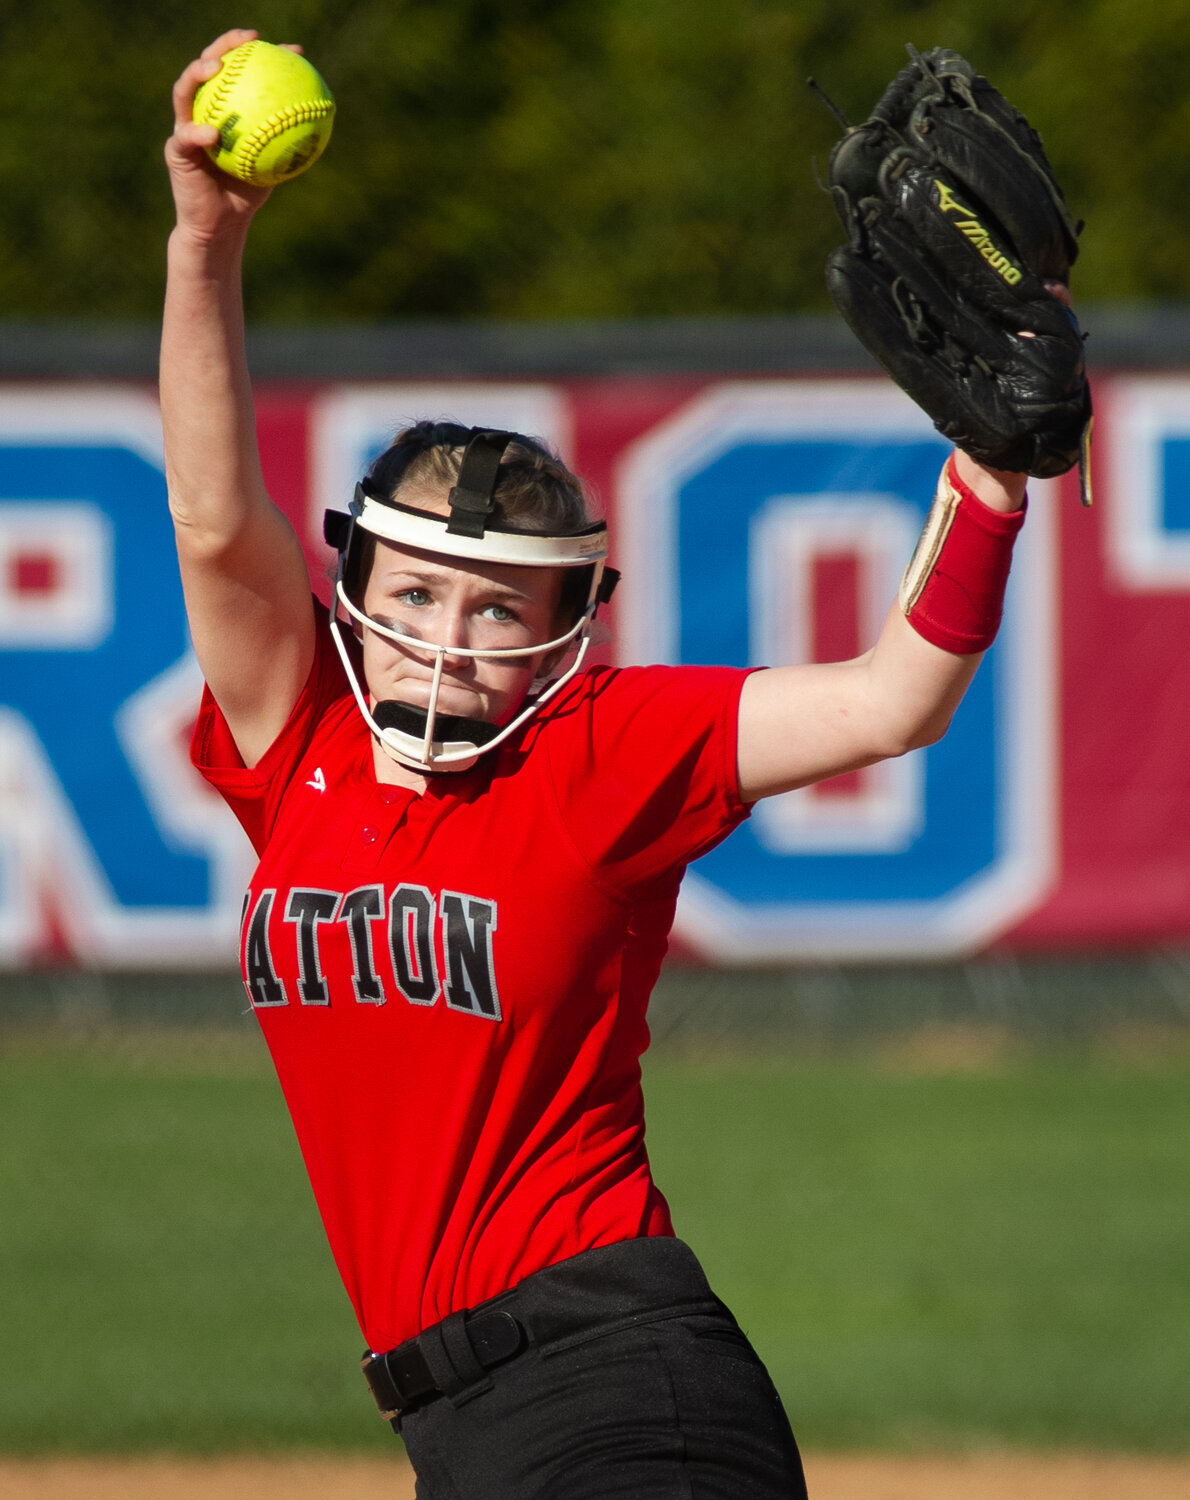 Patton sophomore Marleigh Carswell winds up before delivering to the plate during Wednesday's game. Carswell struck out four in a complete-game effort.